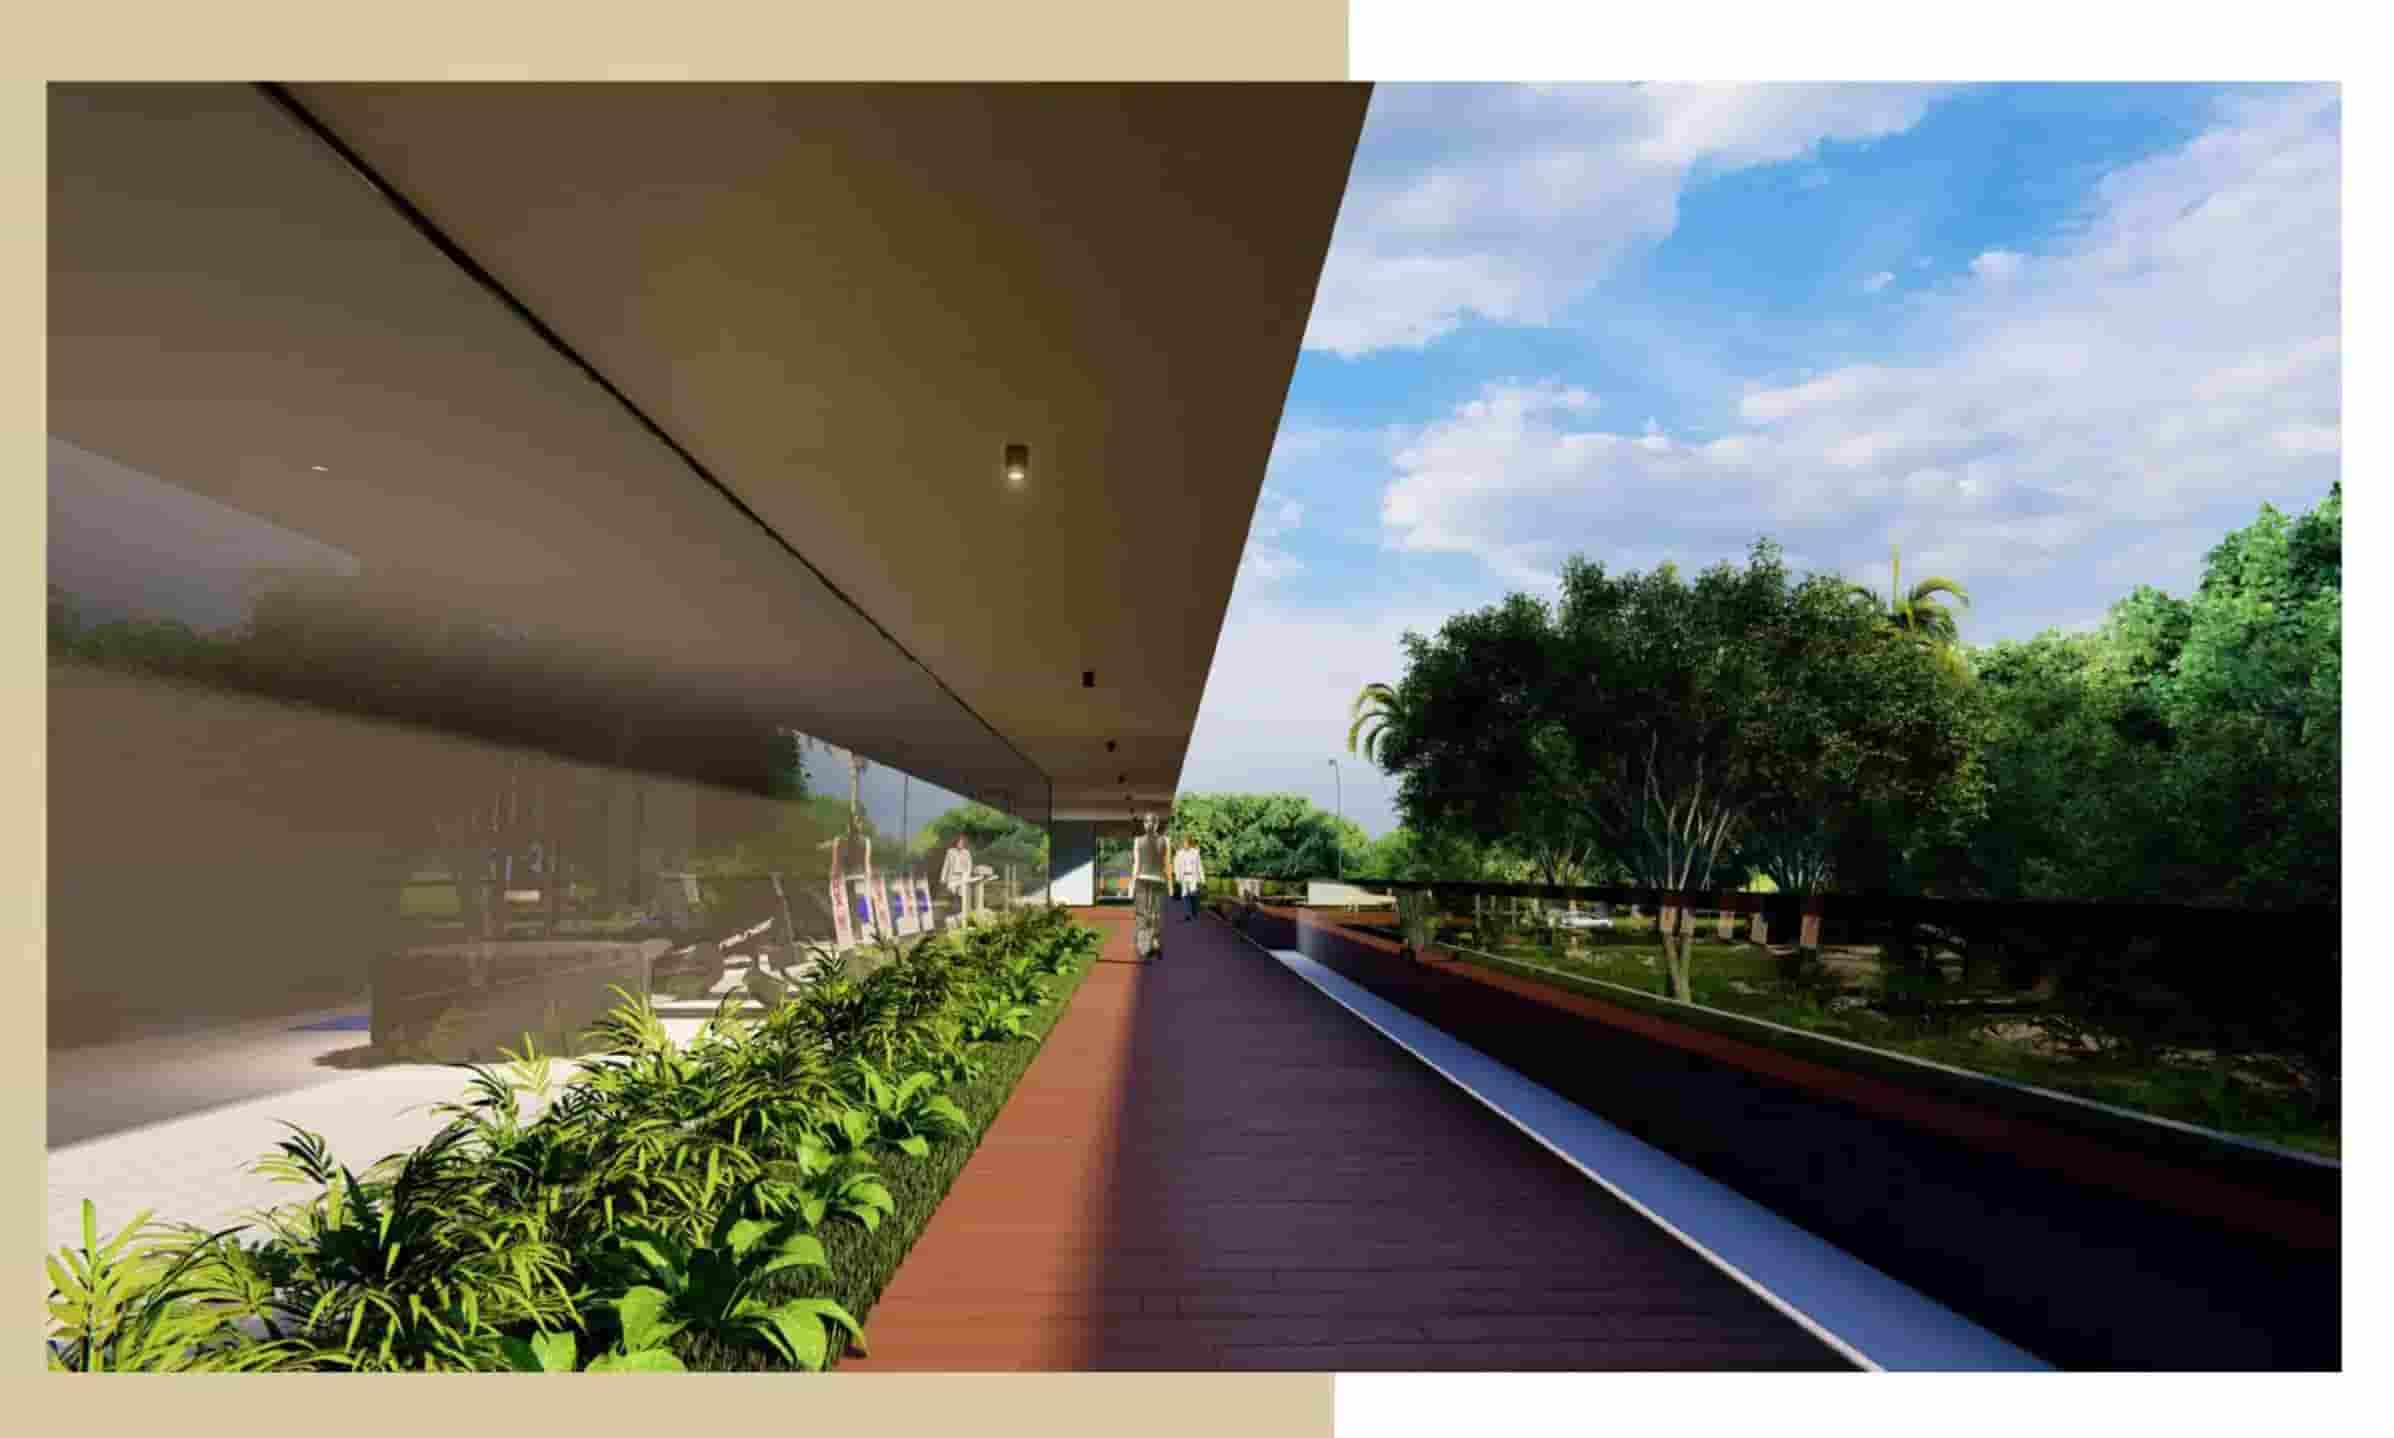 Siddhant Heights Pune